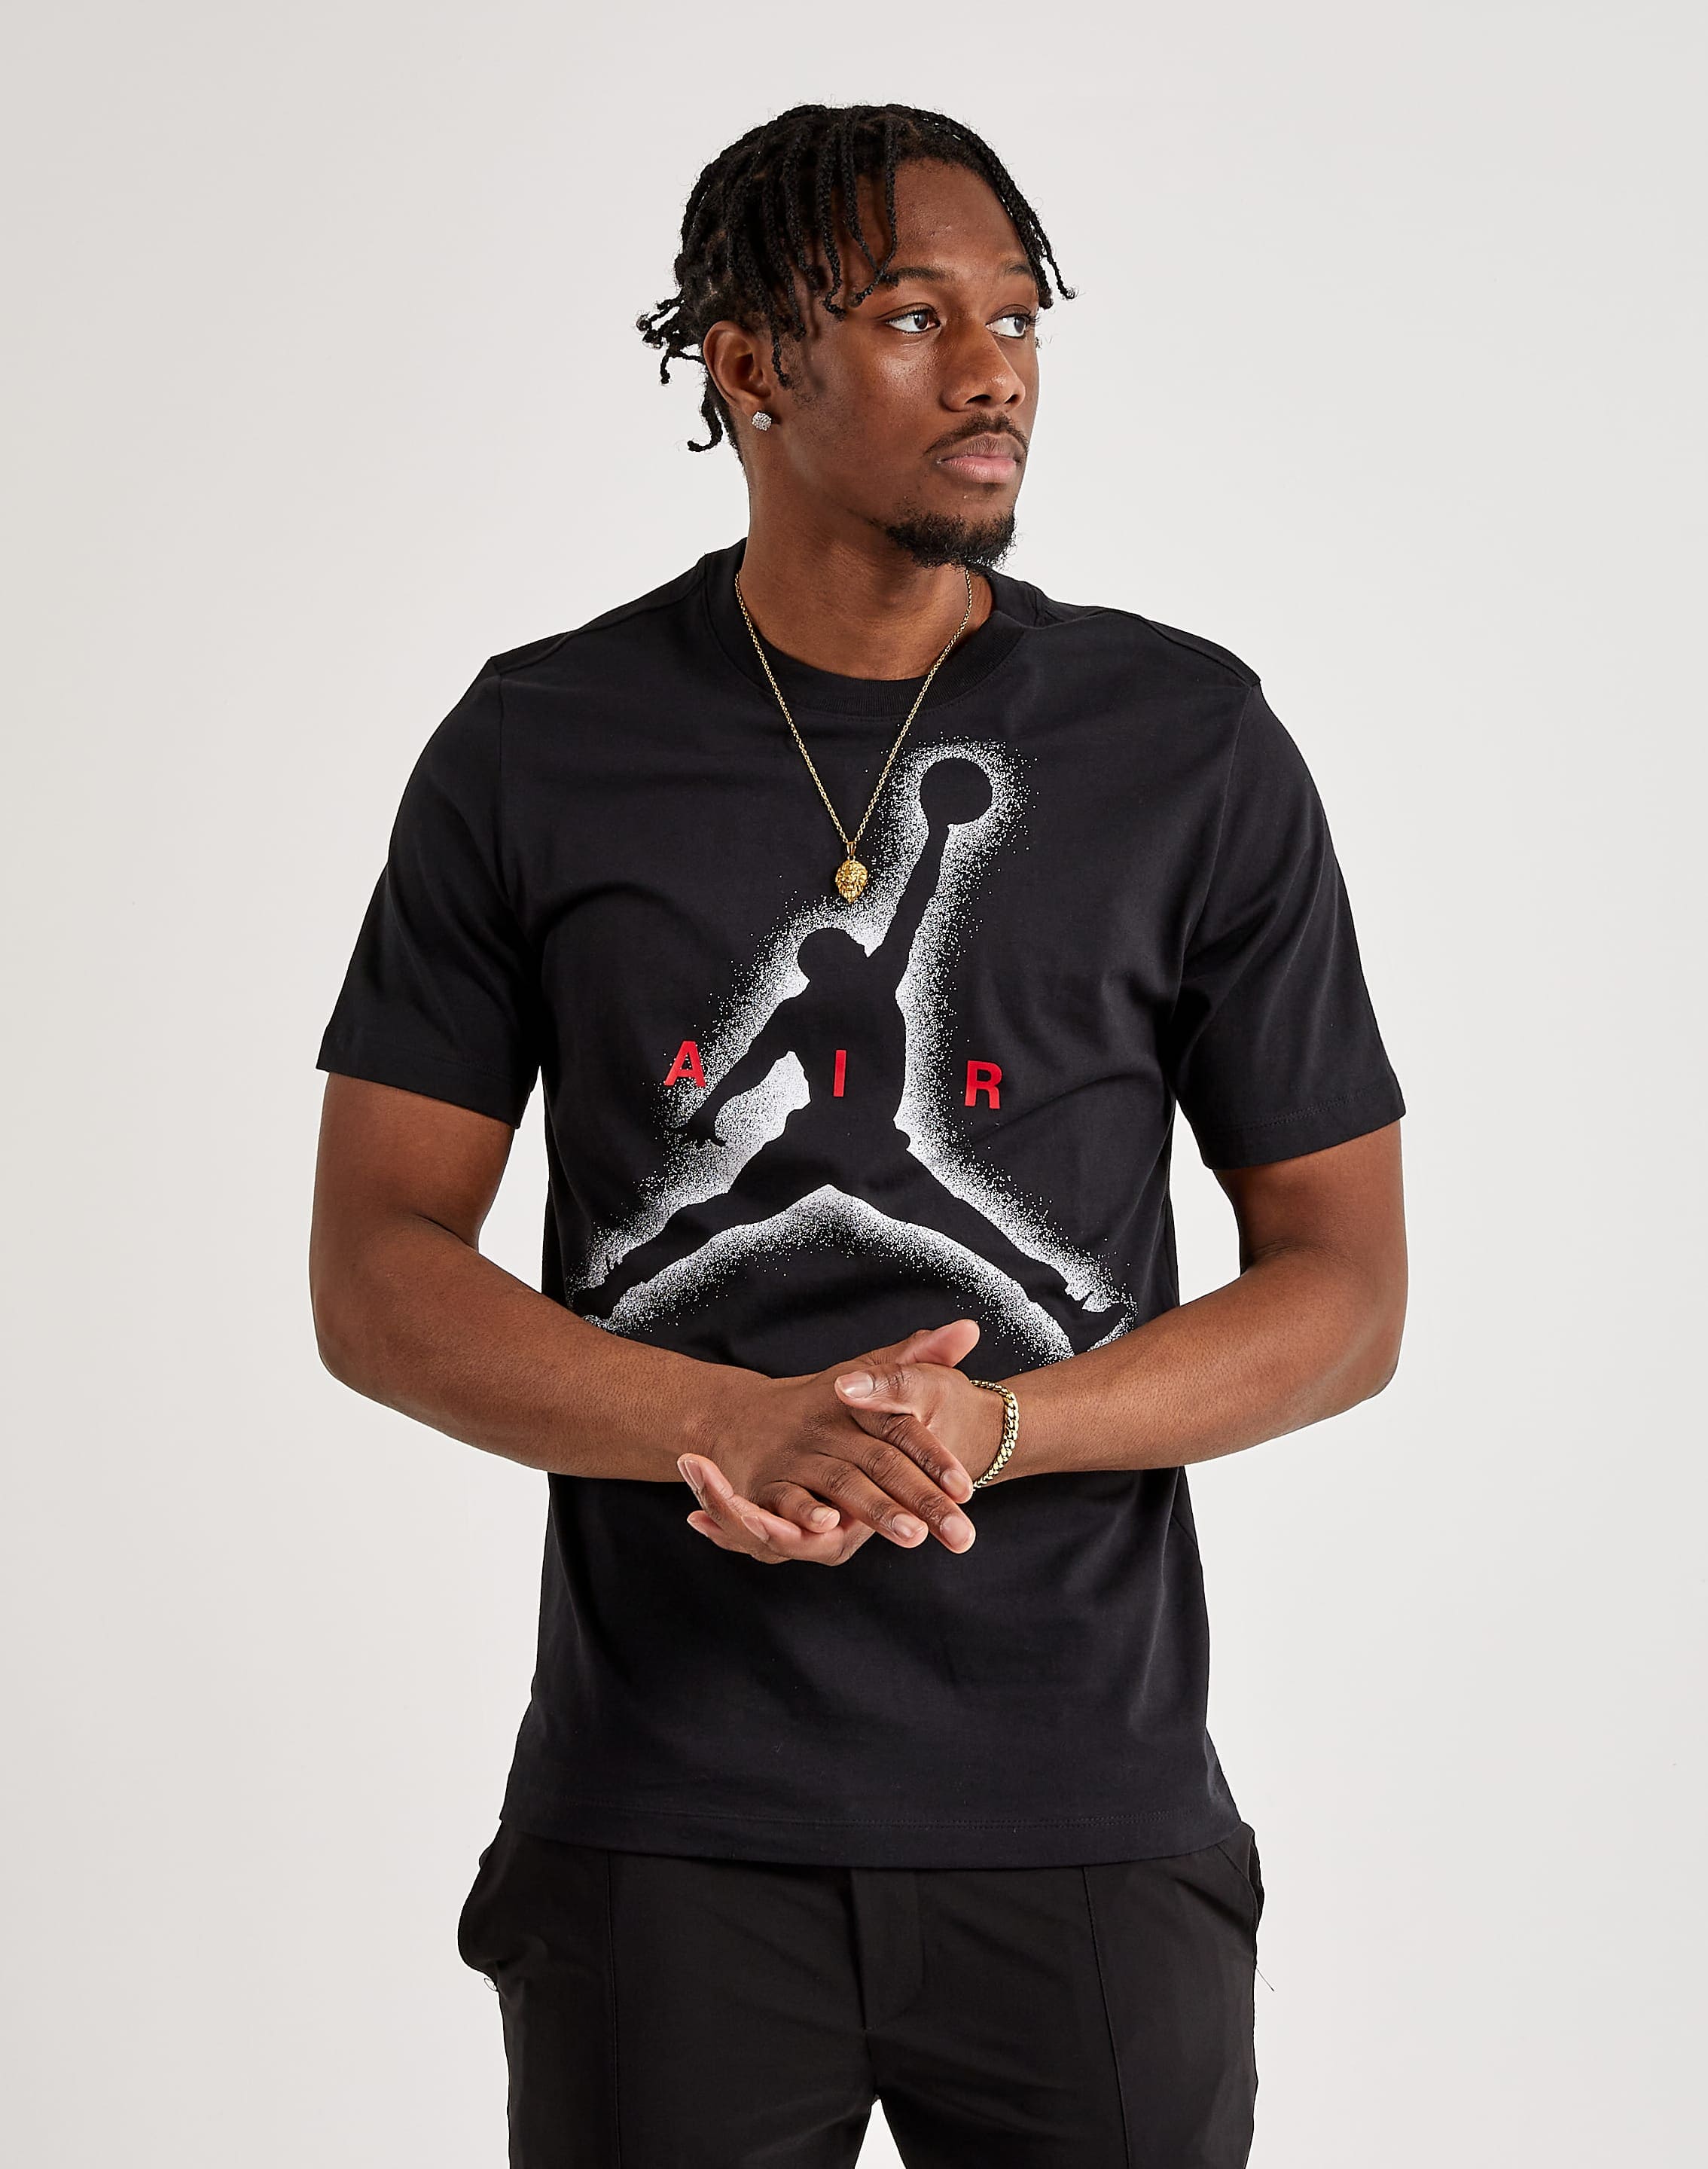 RESTOCKED Jordan Statement Edition Tees Emulate your favorite pro in the  classic fit of the Jordan NBA Statement Edition Tee. Available…